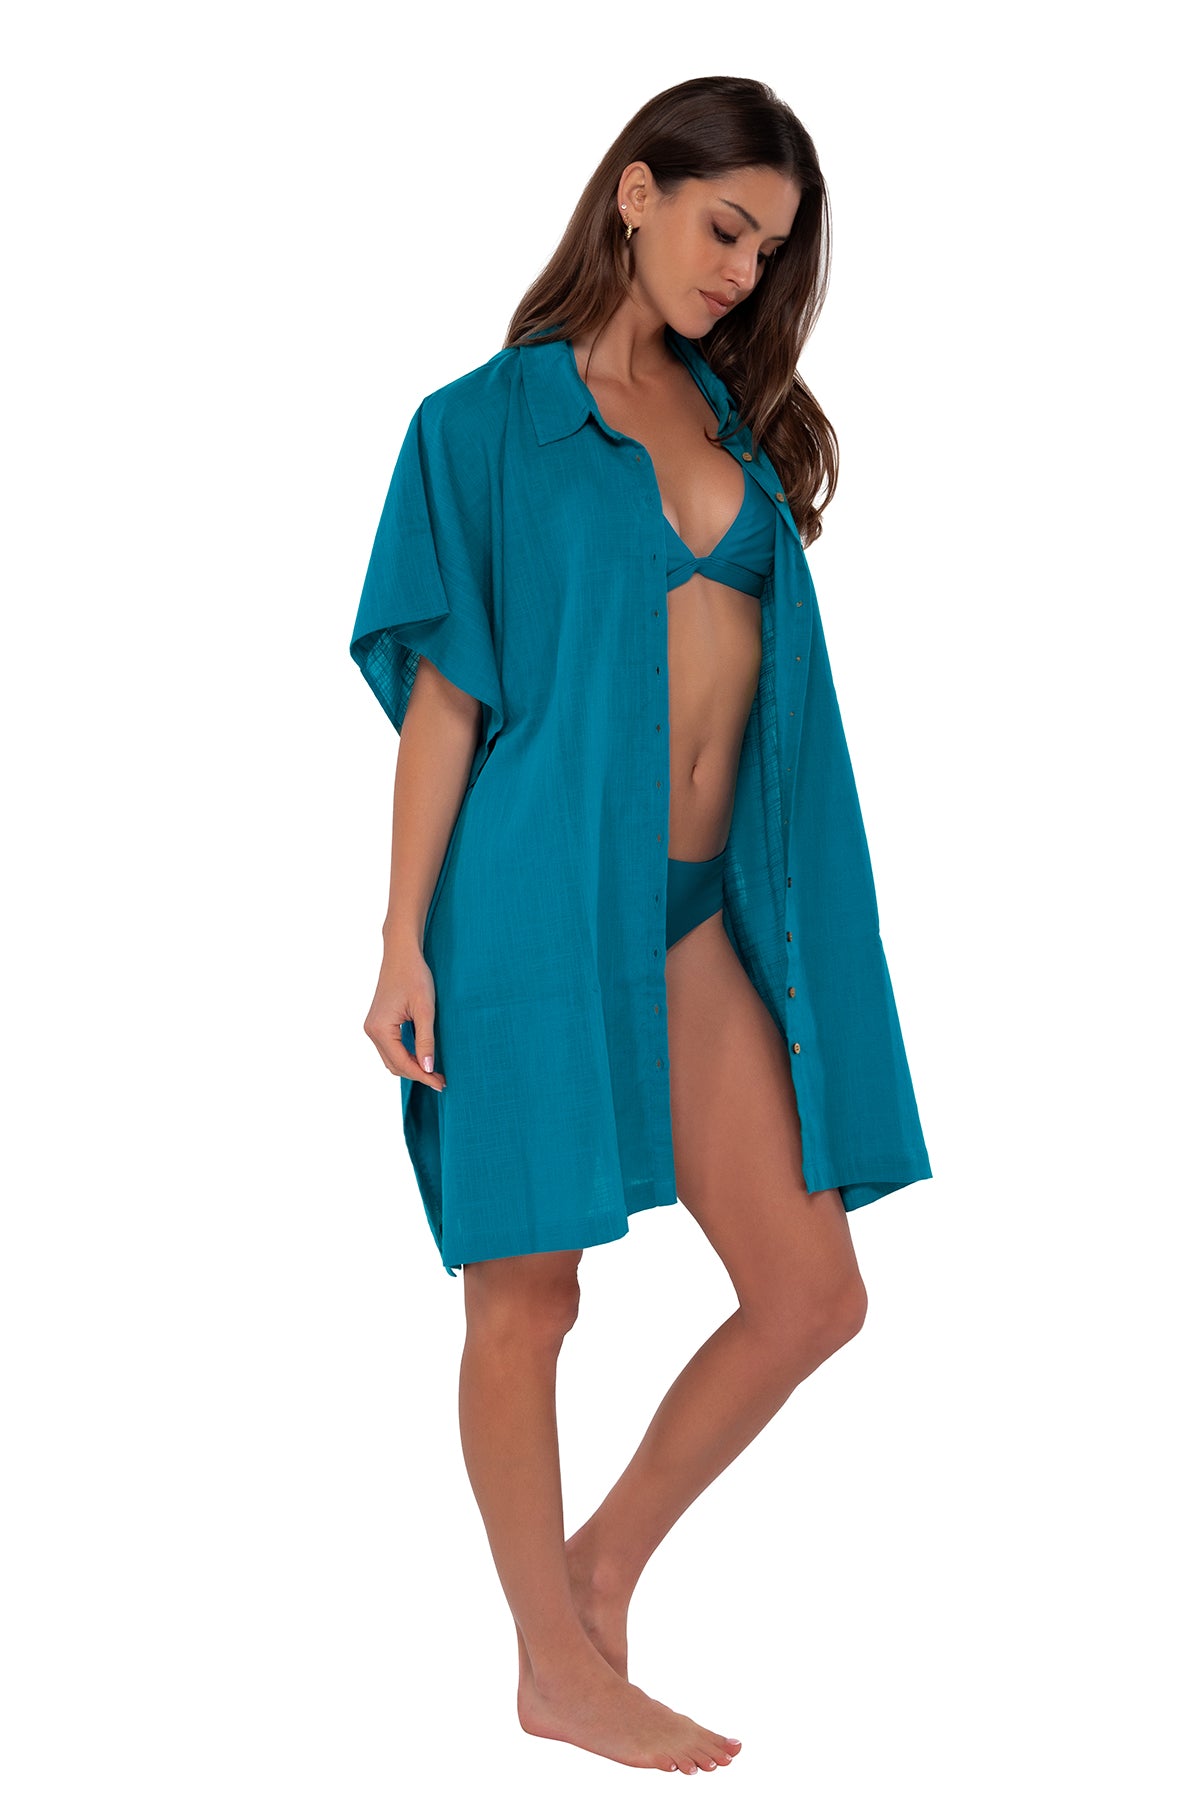 Side pose #1 of Gigi wearing Sunsets Avalon Teal Shore Thing Tunic as an open shirt